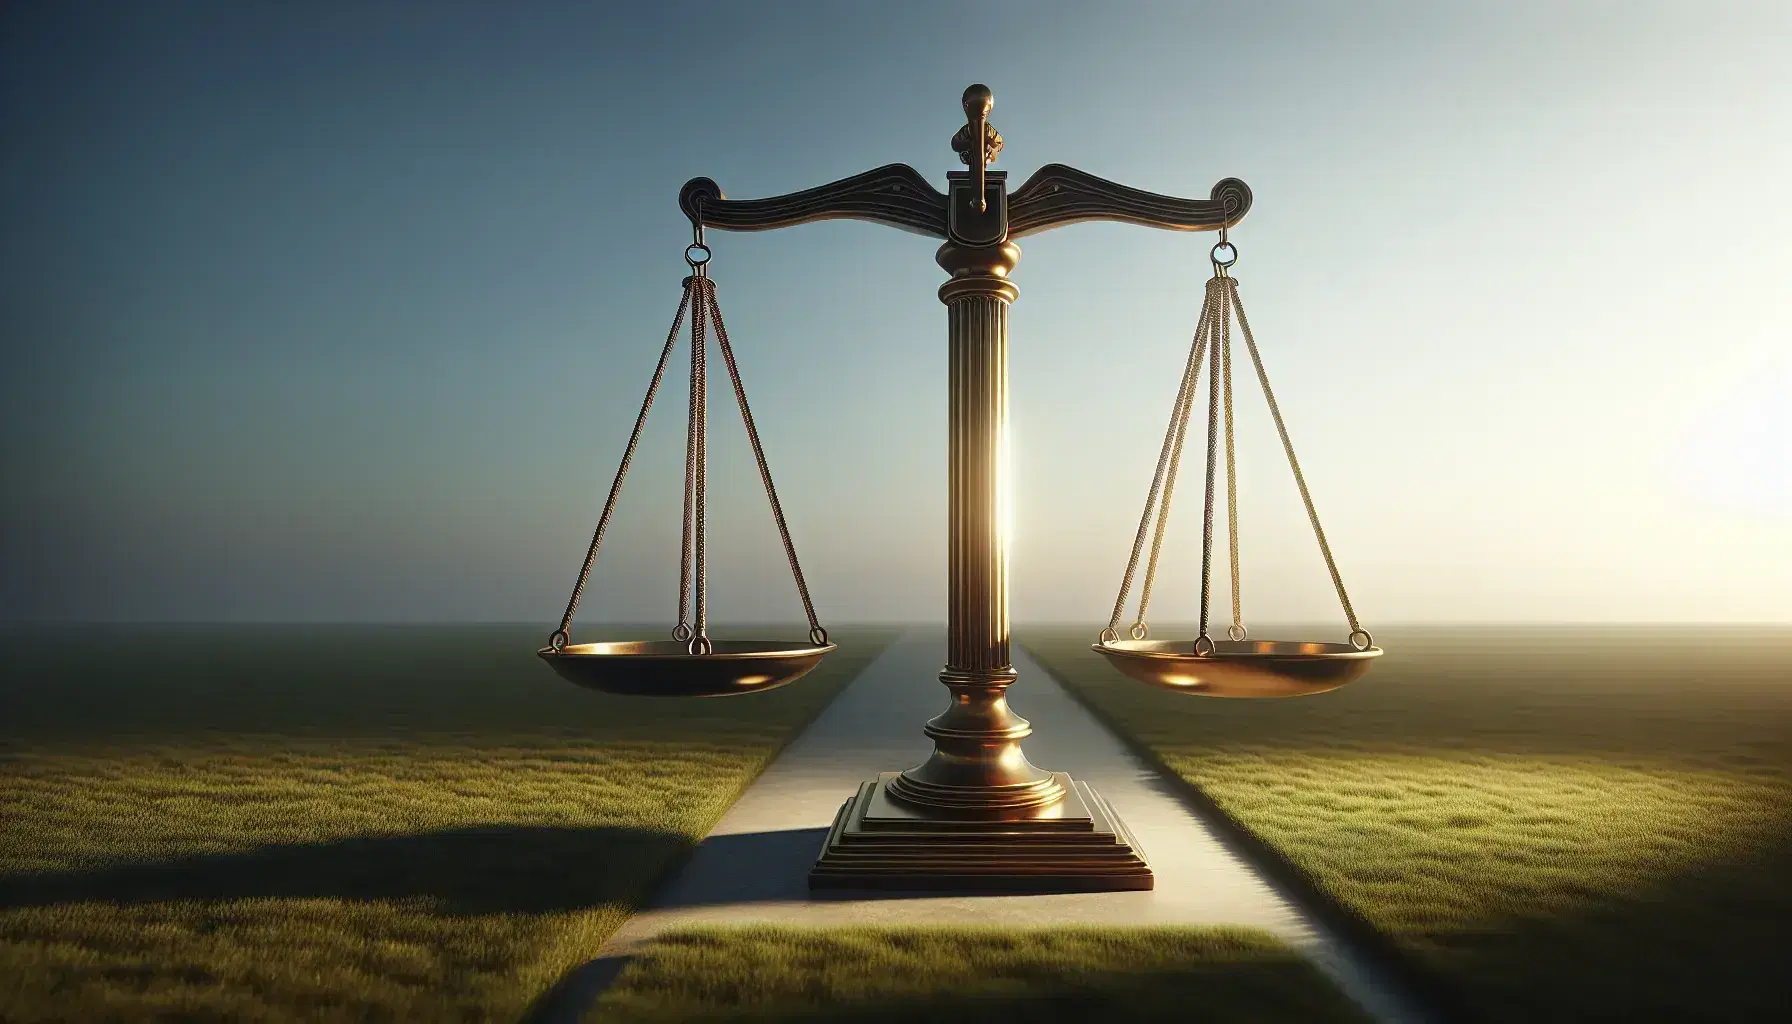 Golden balance scale in equilibrium on a grassy field with a clear blue sky background, symbolizing justice and fairness.